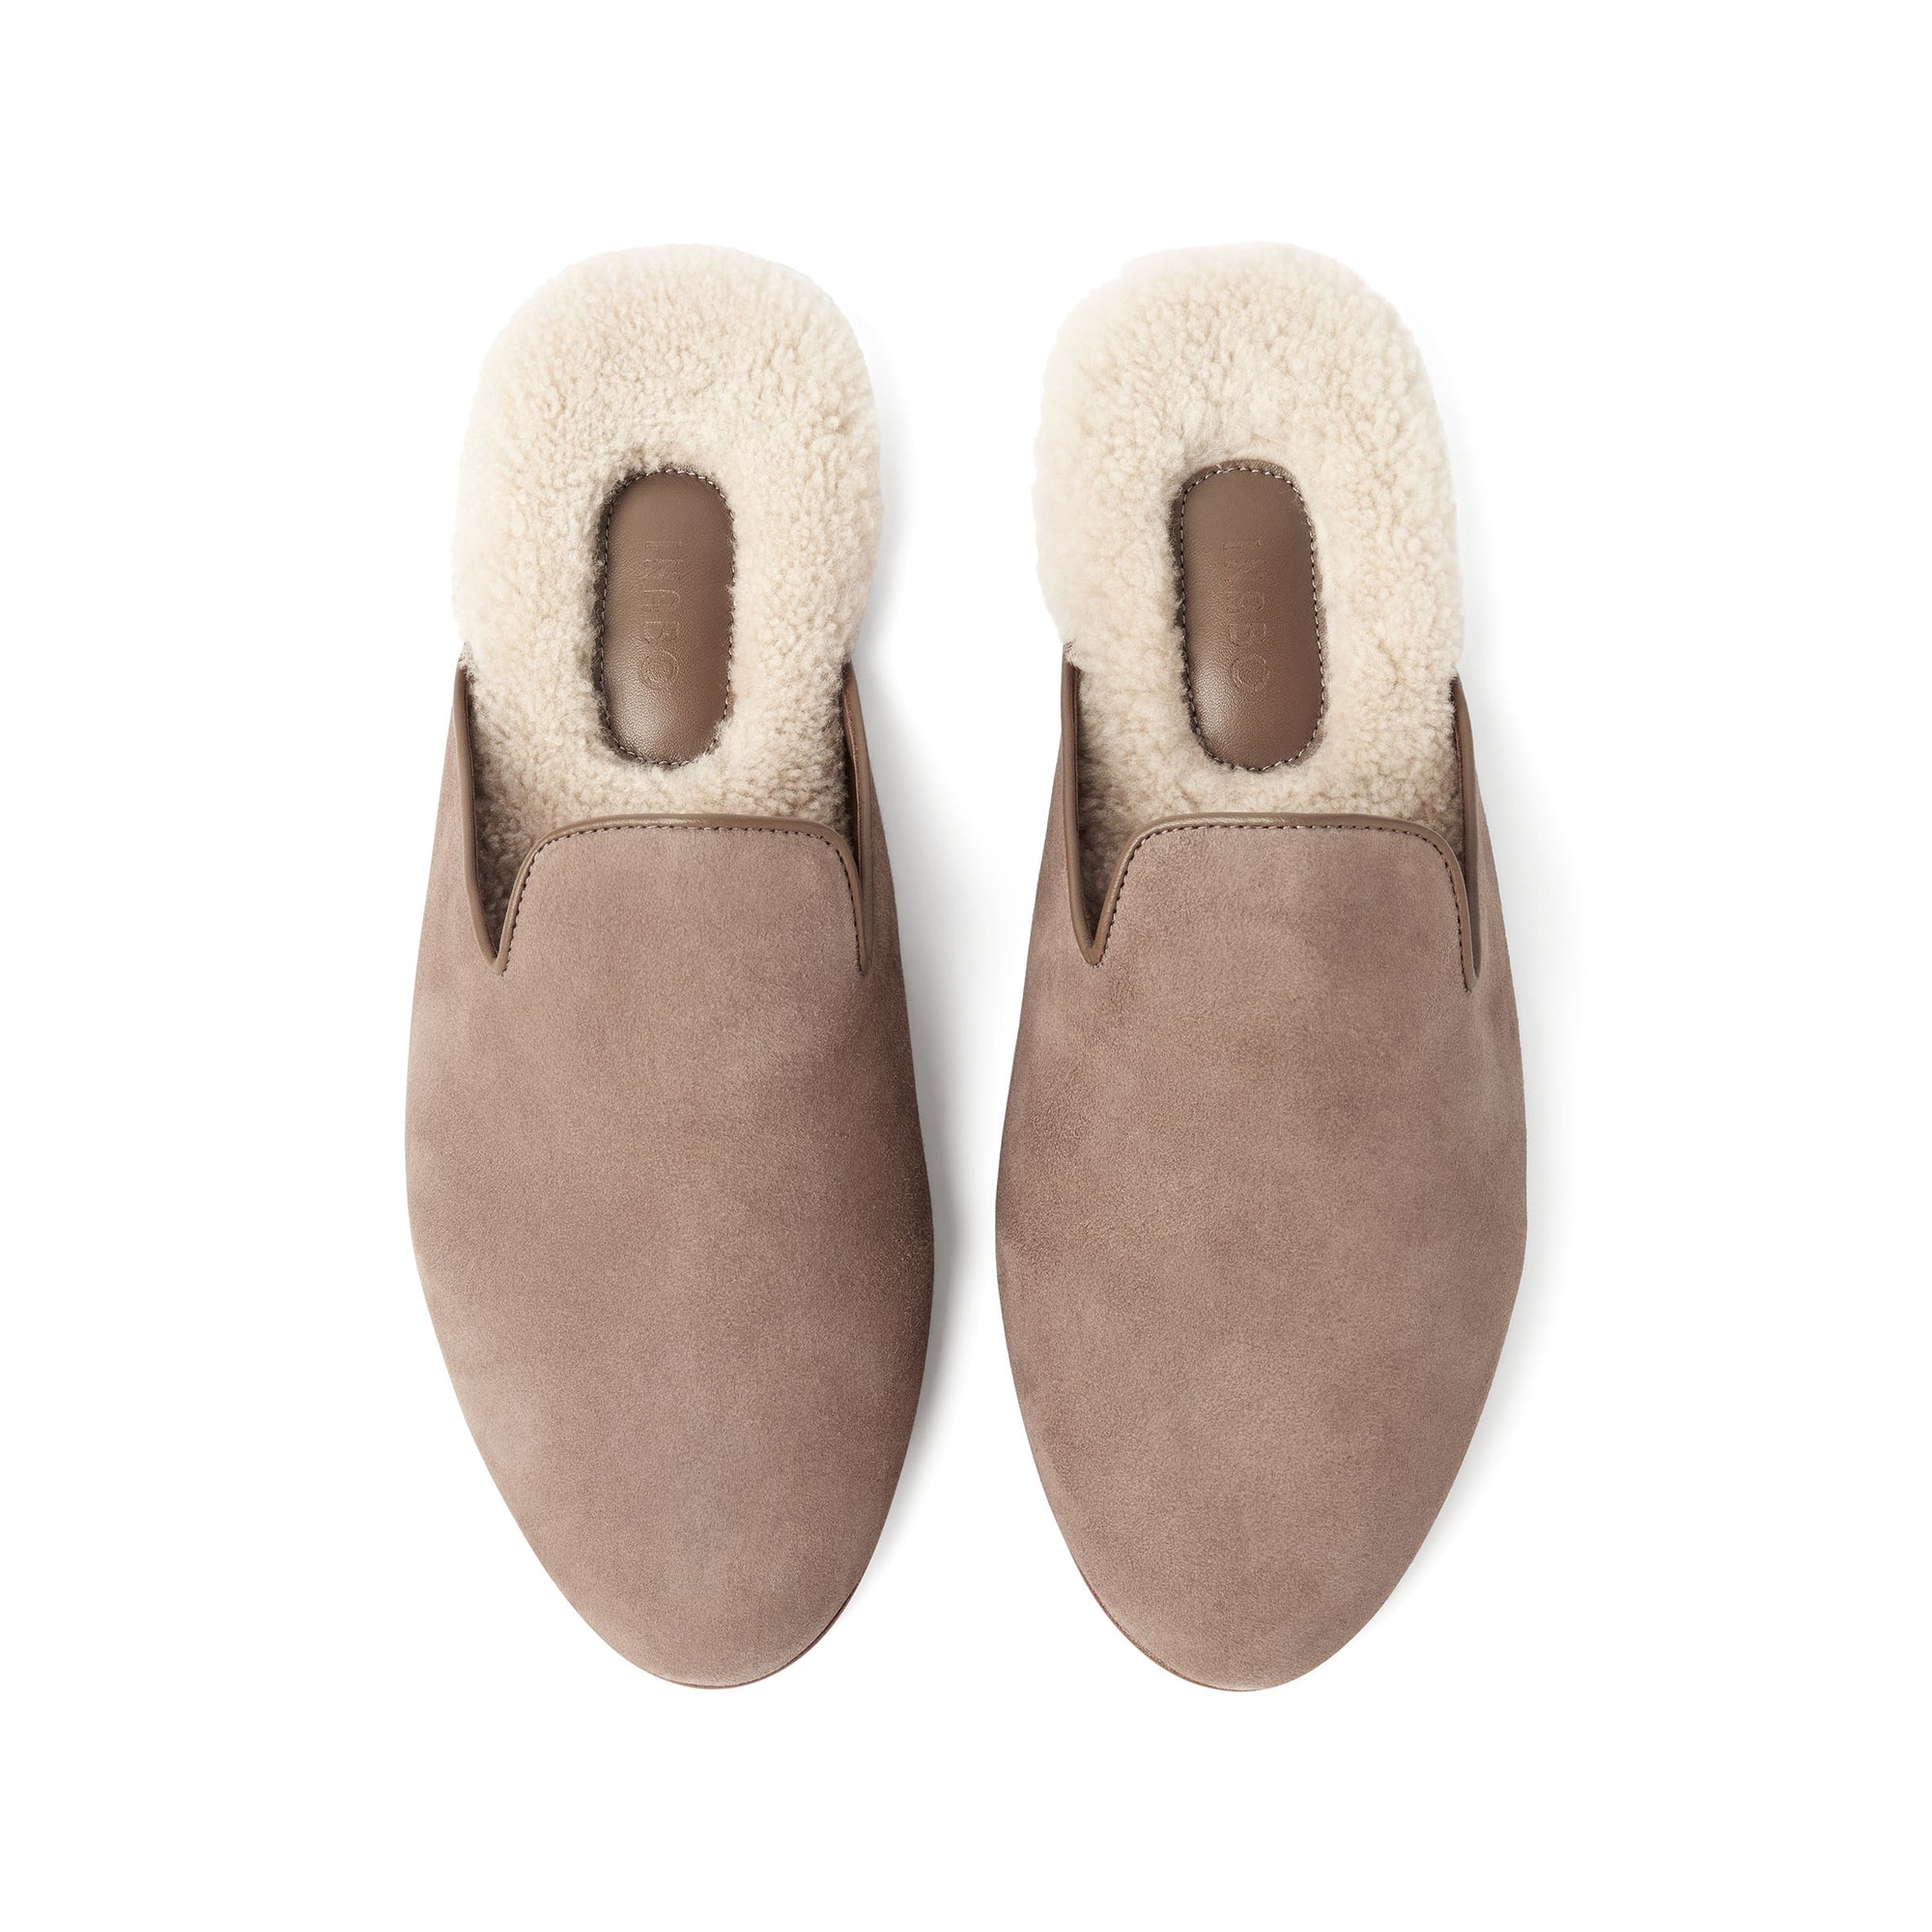 Inabo Men's Fritz Slipper in taupe suede and white shearling from above